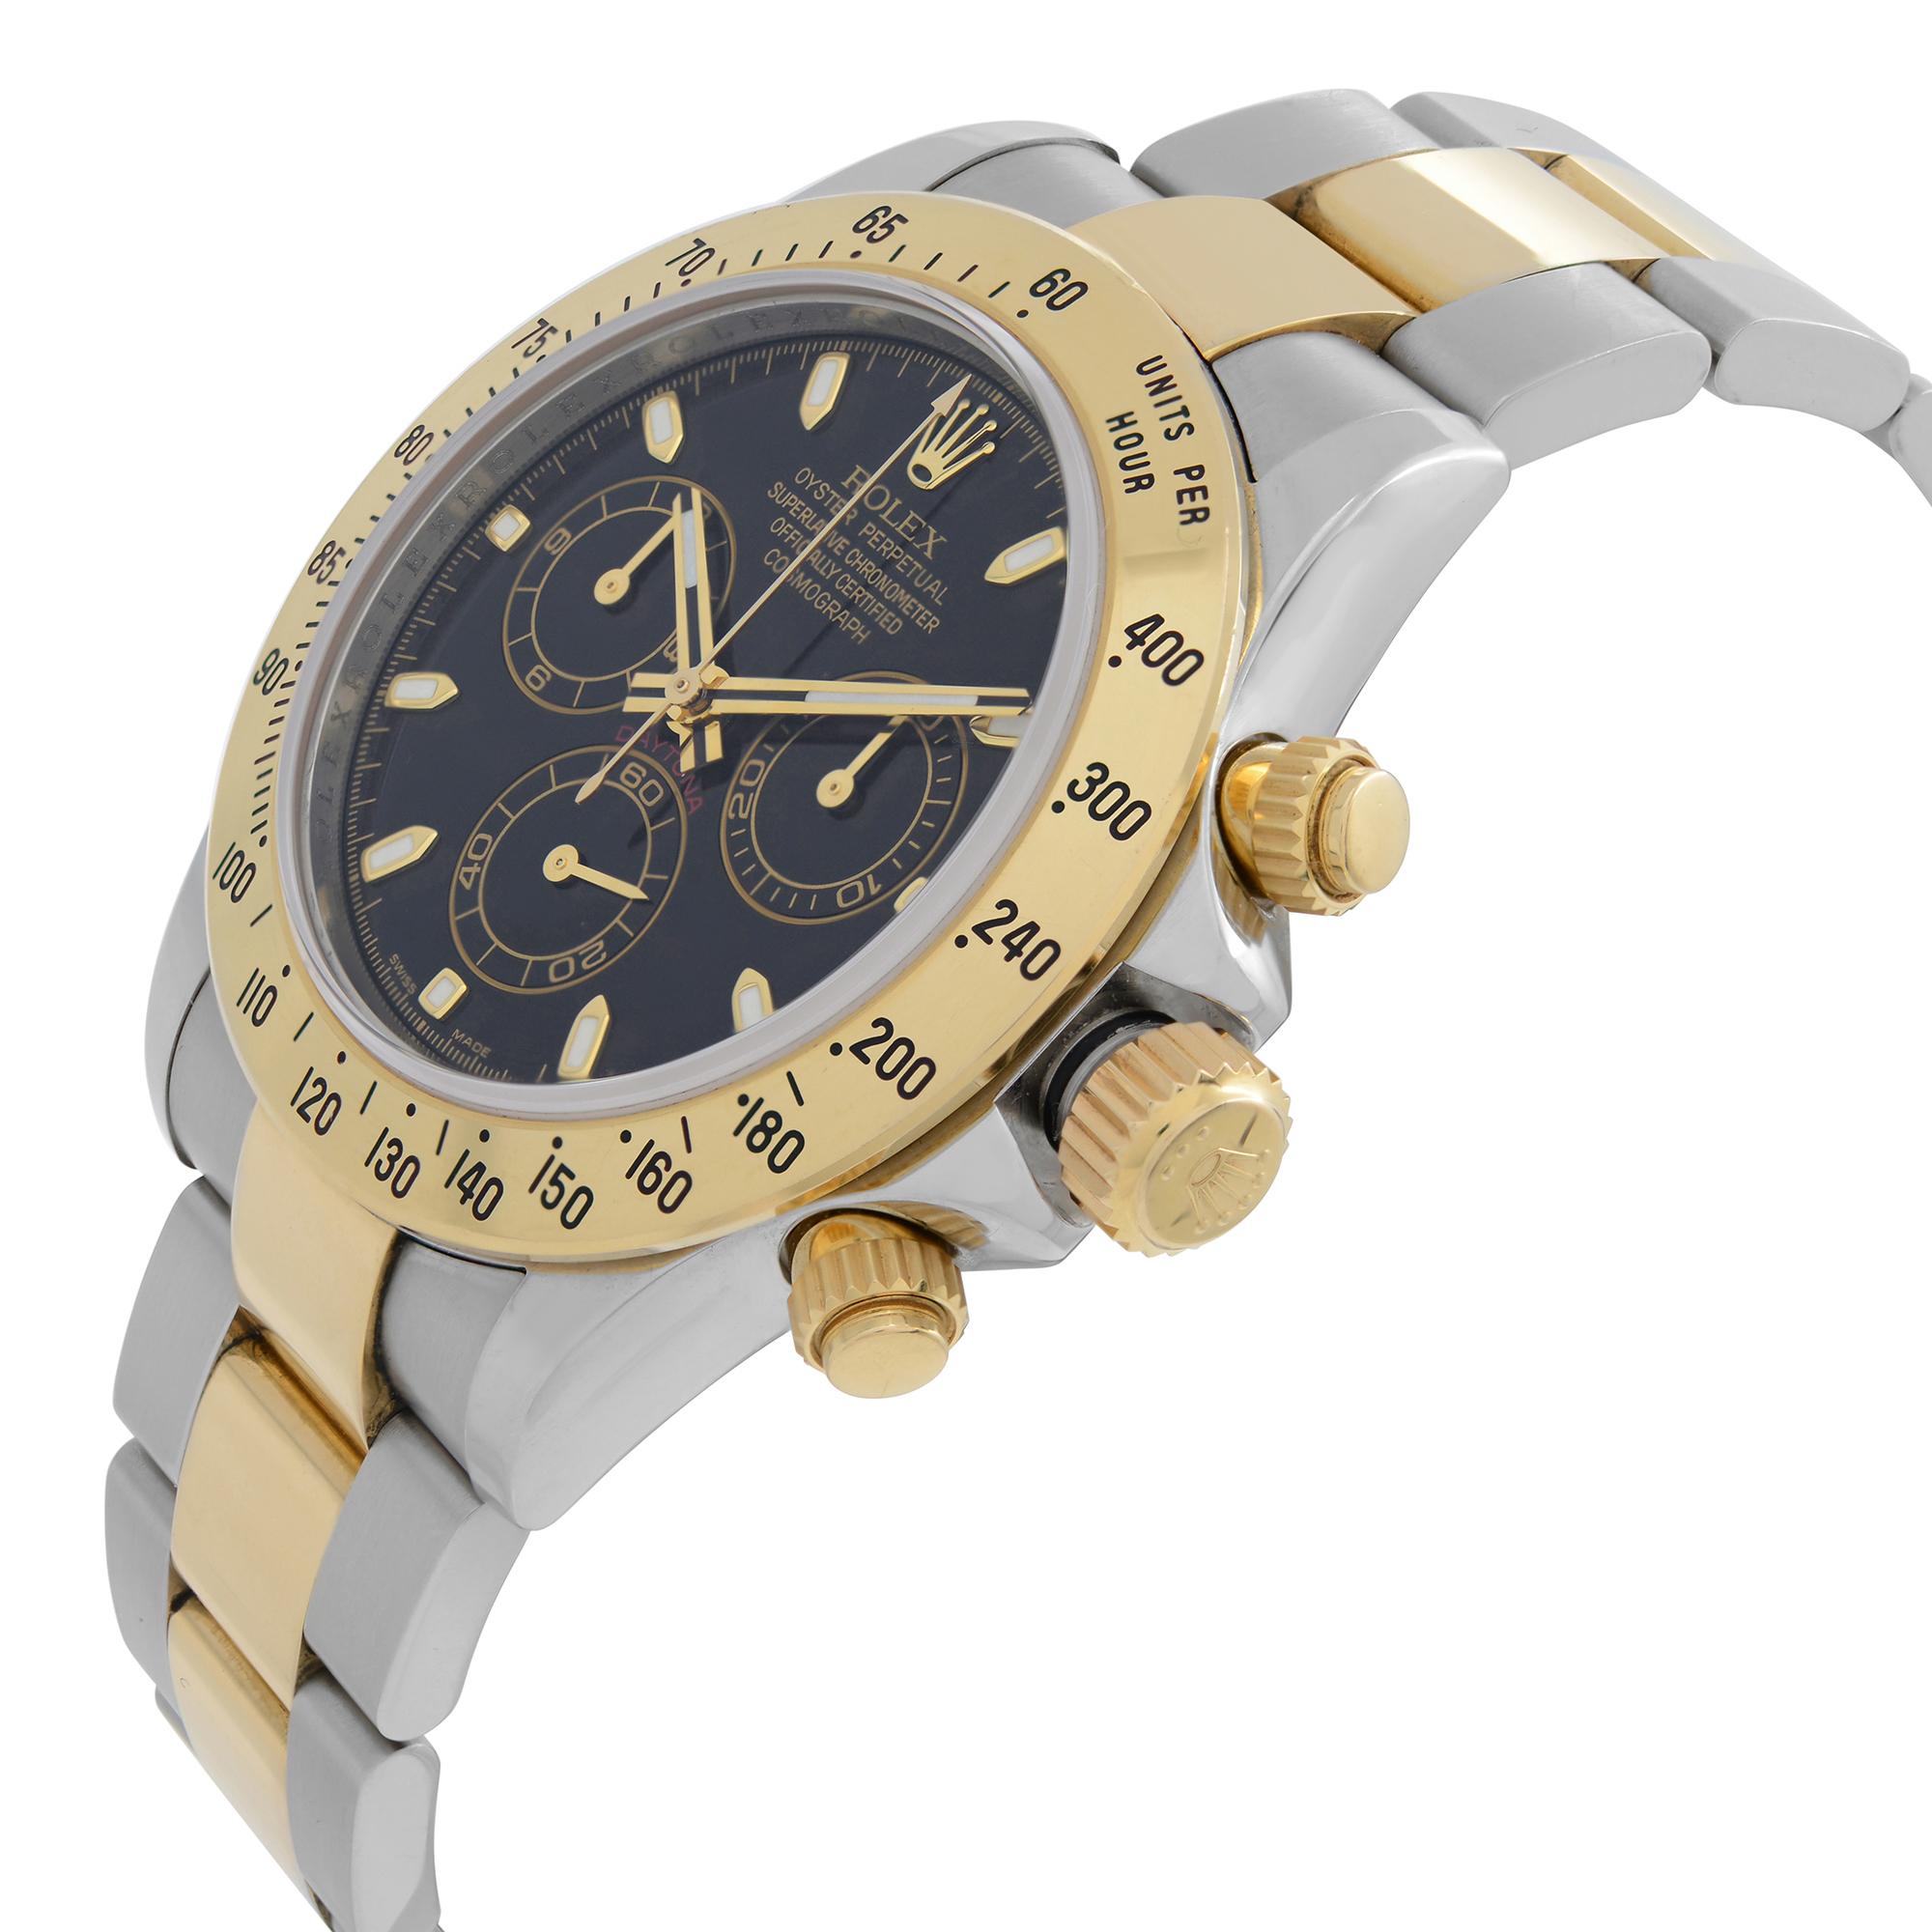 Rolex Daytona 18K Yellow Gold Steel Black Dial Automatic Men's Watch 116523 In Good Condition For Sale In New York, NY